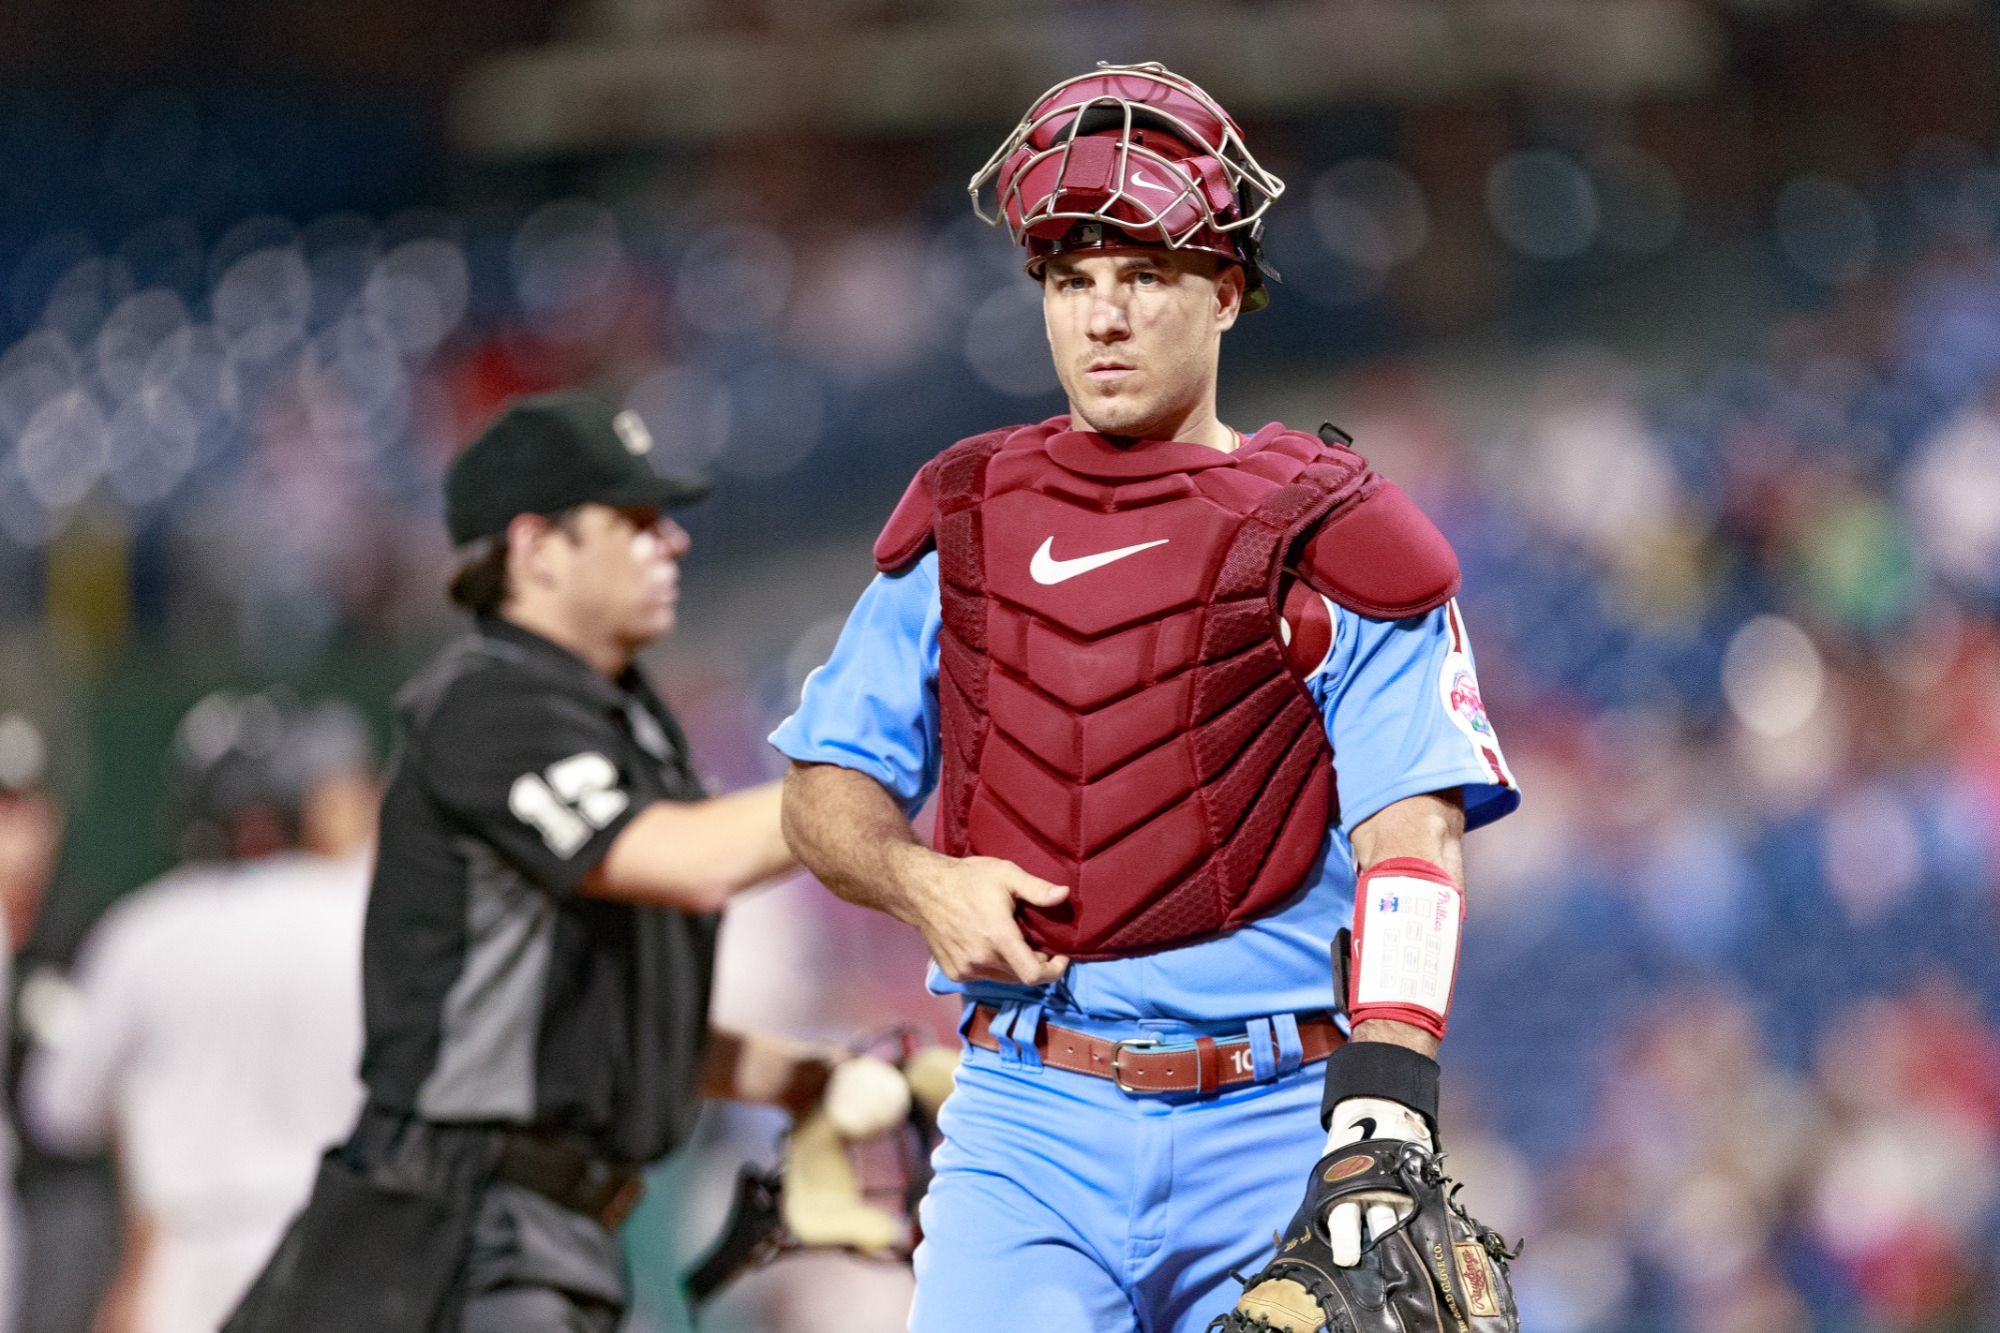 Among other duties, J.T. Realmuto aims to turn around Phillies